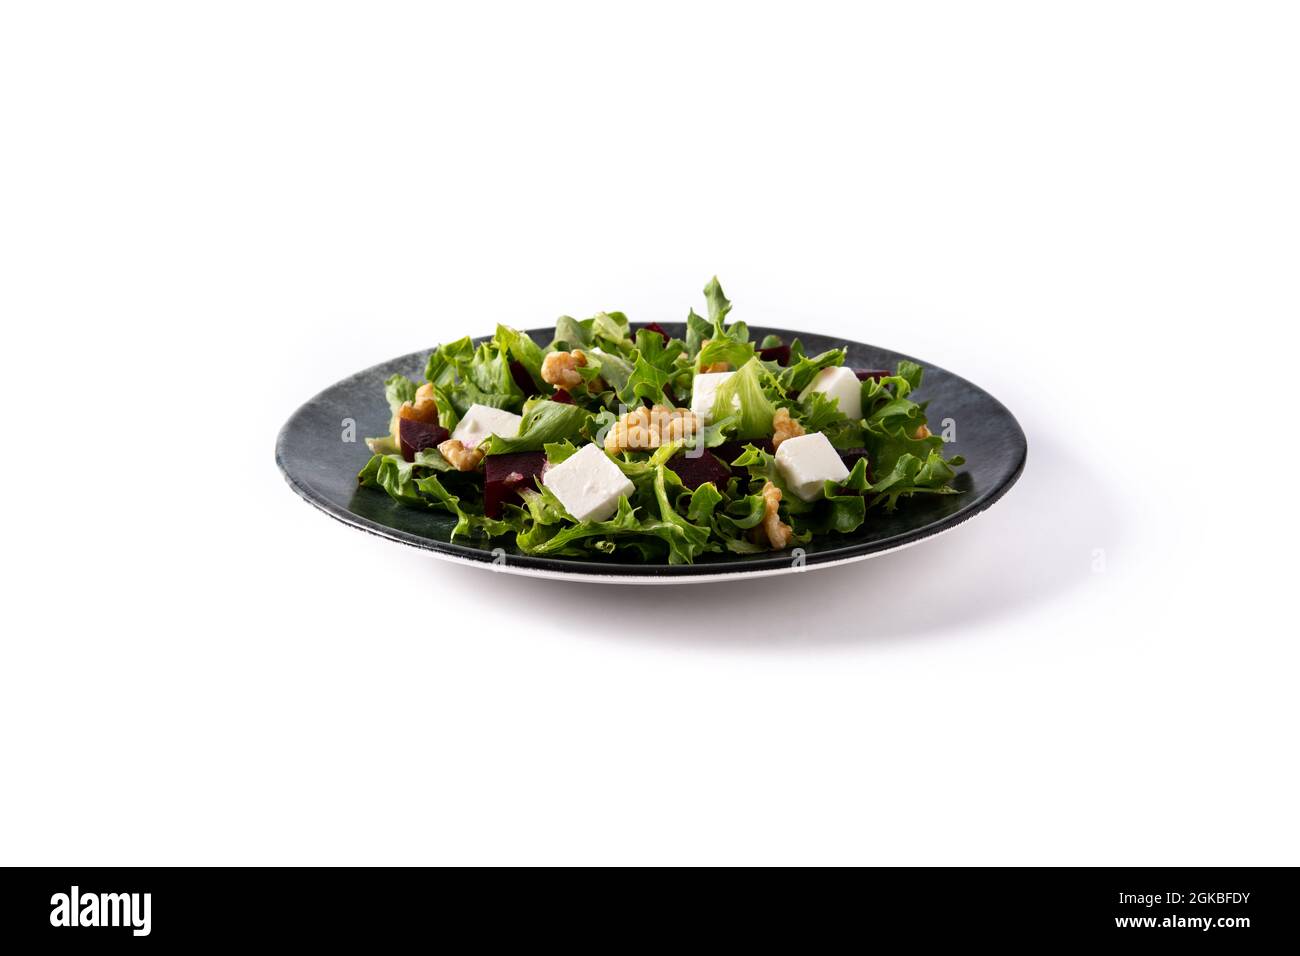 Beetroot salad with feta cheese,lettuce and walnuts isolated on white background Stock Photo